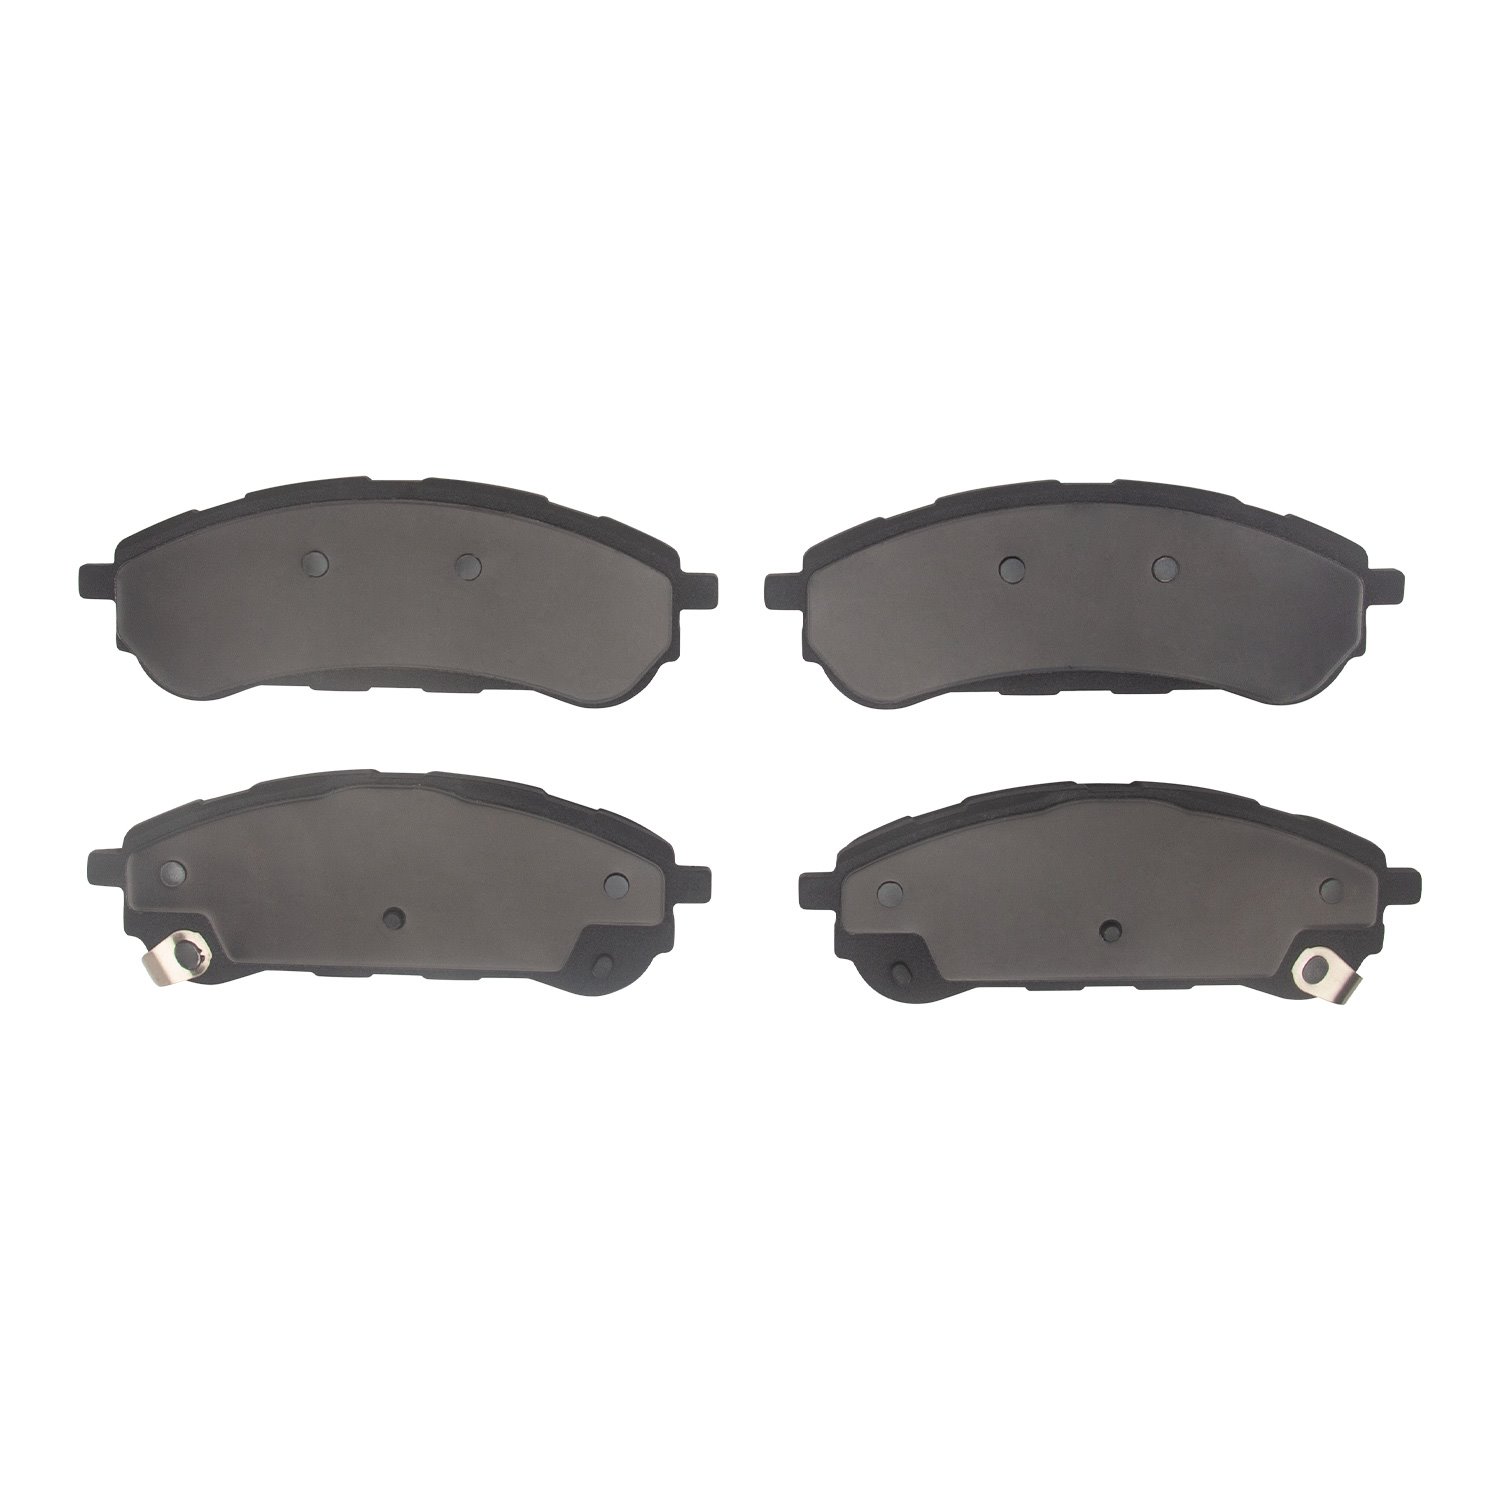 1400-2208-00 Ultimate-Duty Brake Pads Kit, Fits Select Ford/Lincoln/Mercury/Mazda, Position: Rear